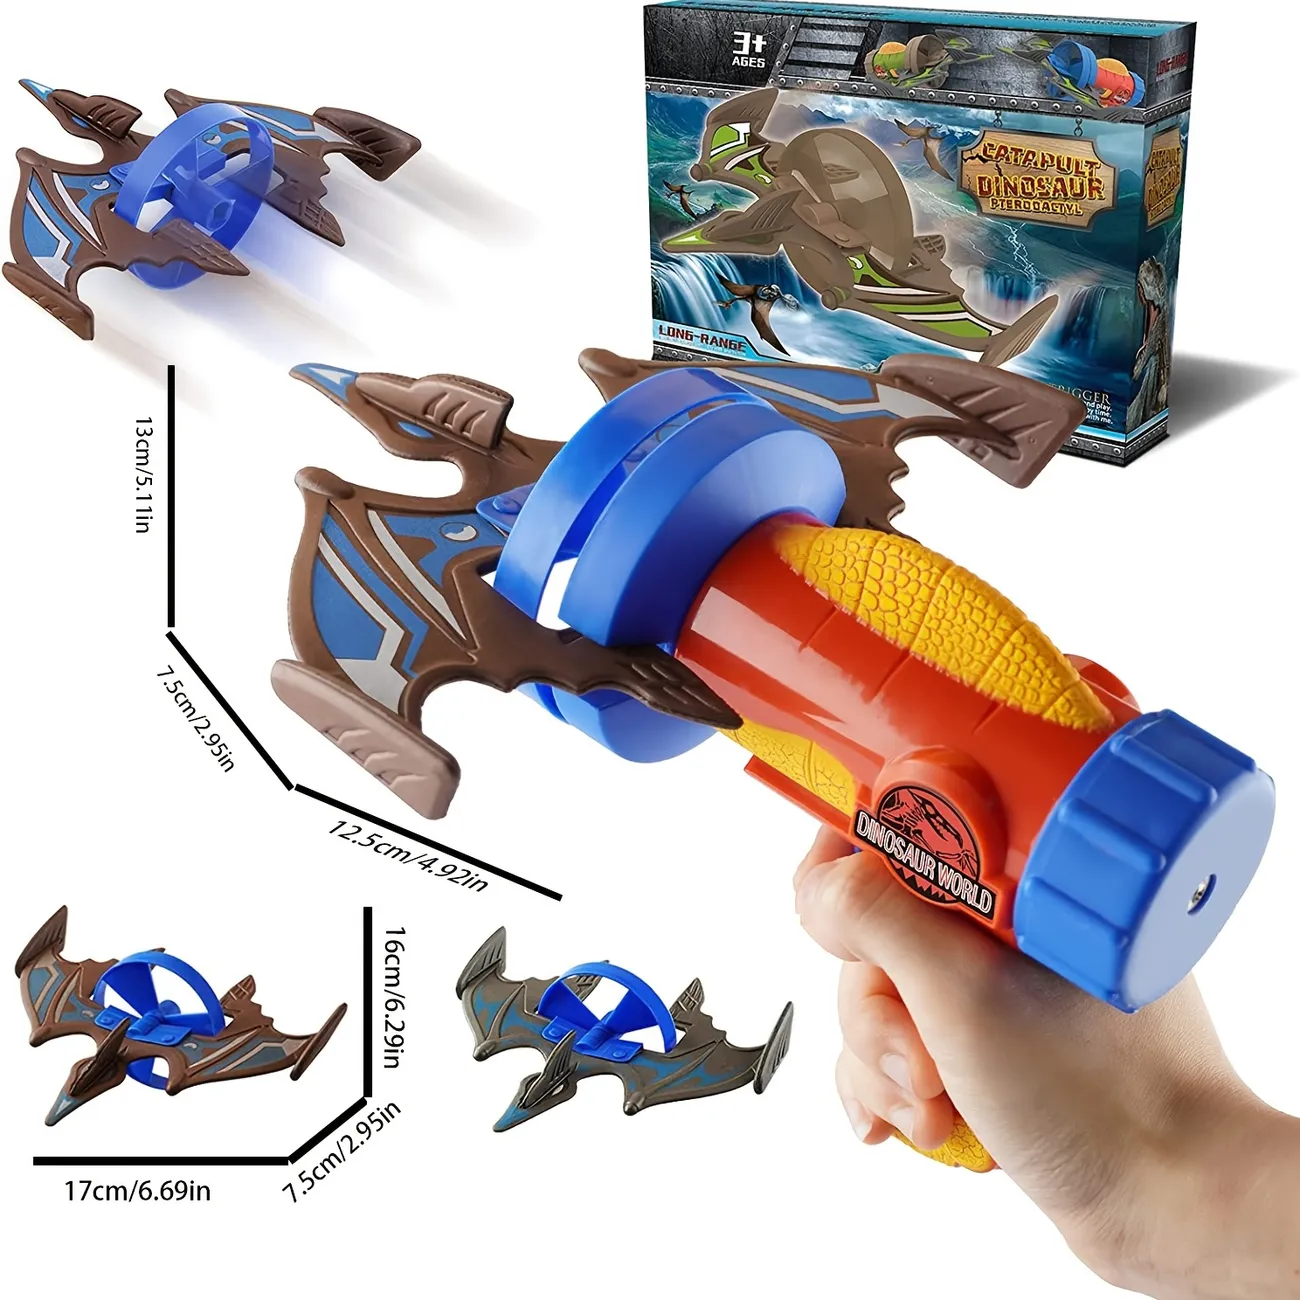 Dinosaur Catapult Plane Toy Target Shooting Game For Kids With Foam Plane Catapult Plane Launcher Dinosaur Target For Shooting Outdoor Toy Gift For Boys 4 Years Old Red - Toys and Games